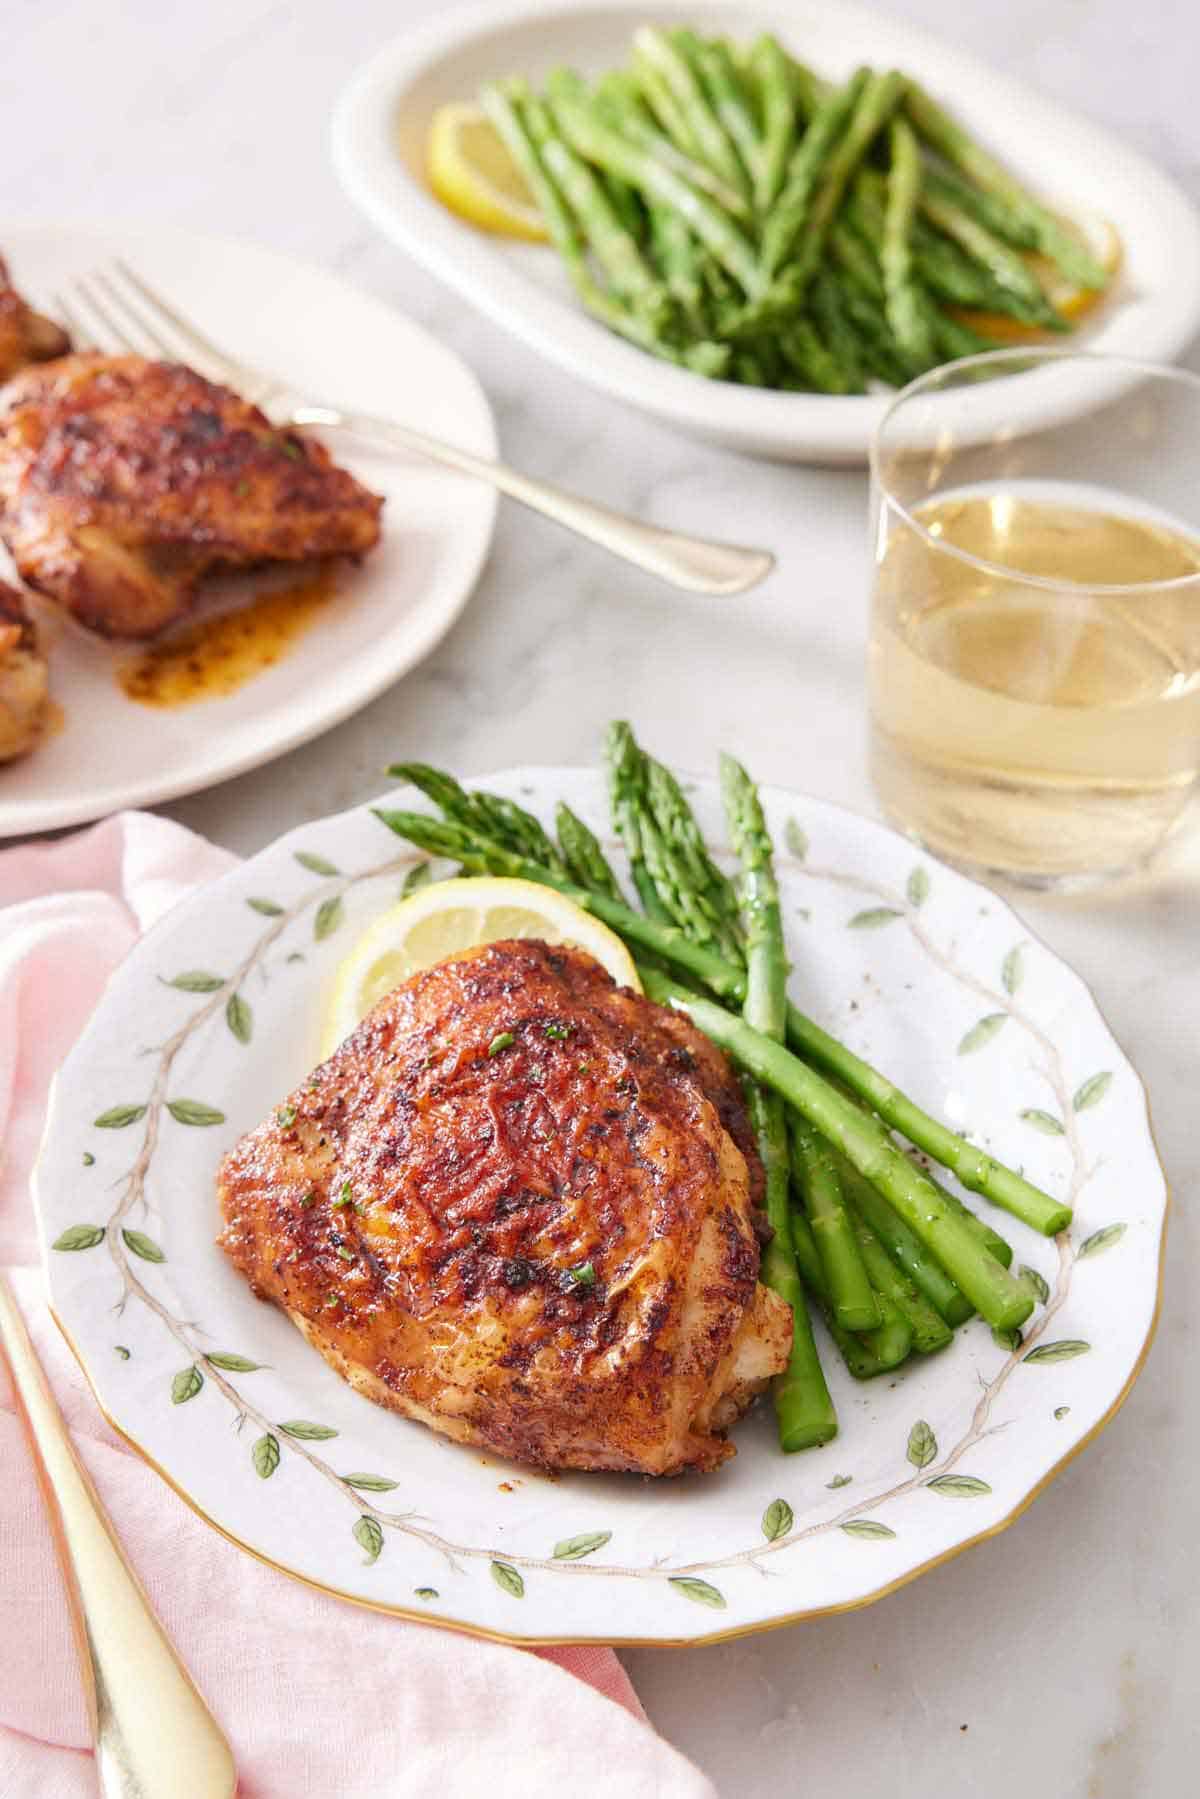 A plate with an air fryer chicken thigh, asparagus, and a lemon slice. A plate of more thighs, a glass of wine, and a platter of asparagus in the background.